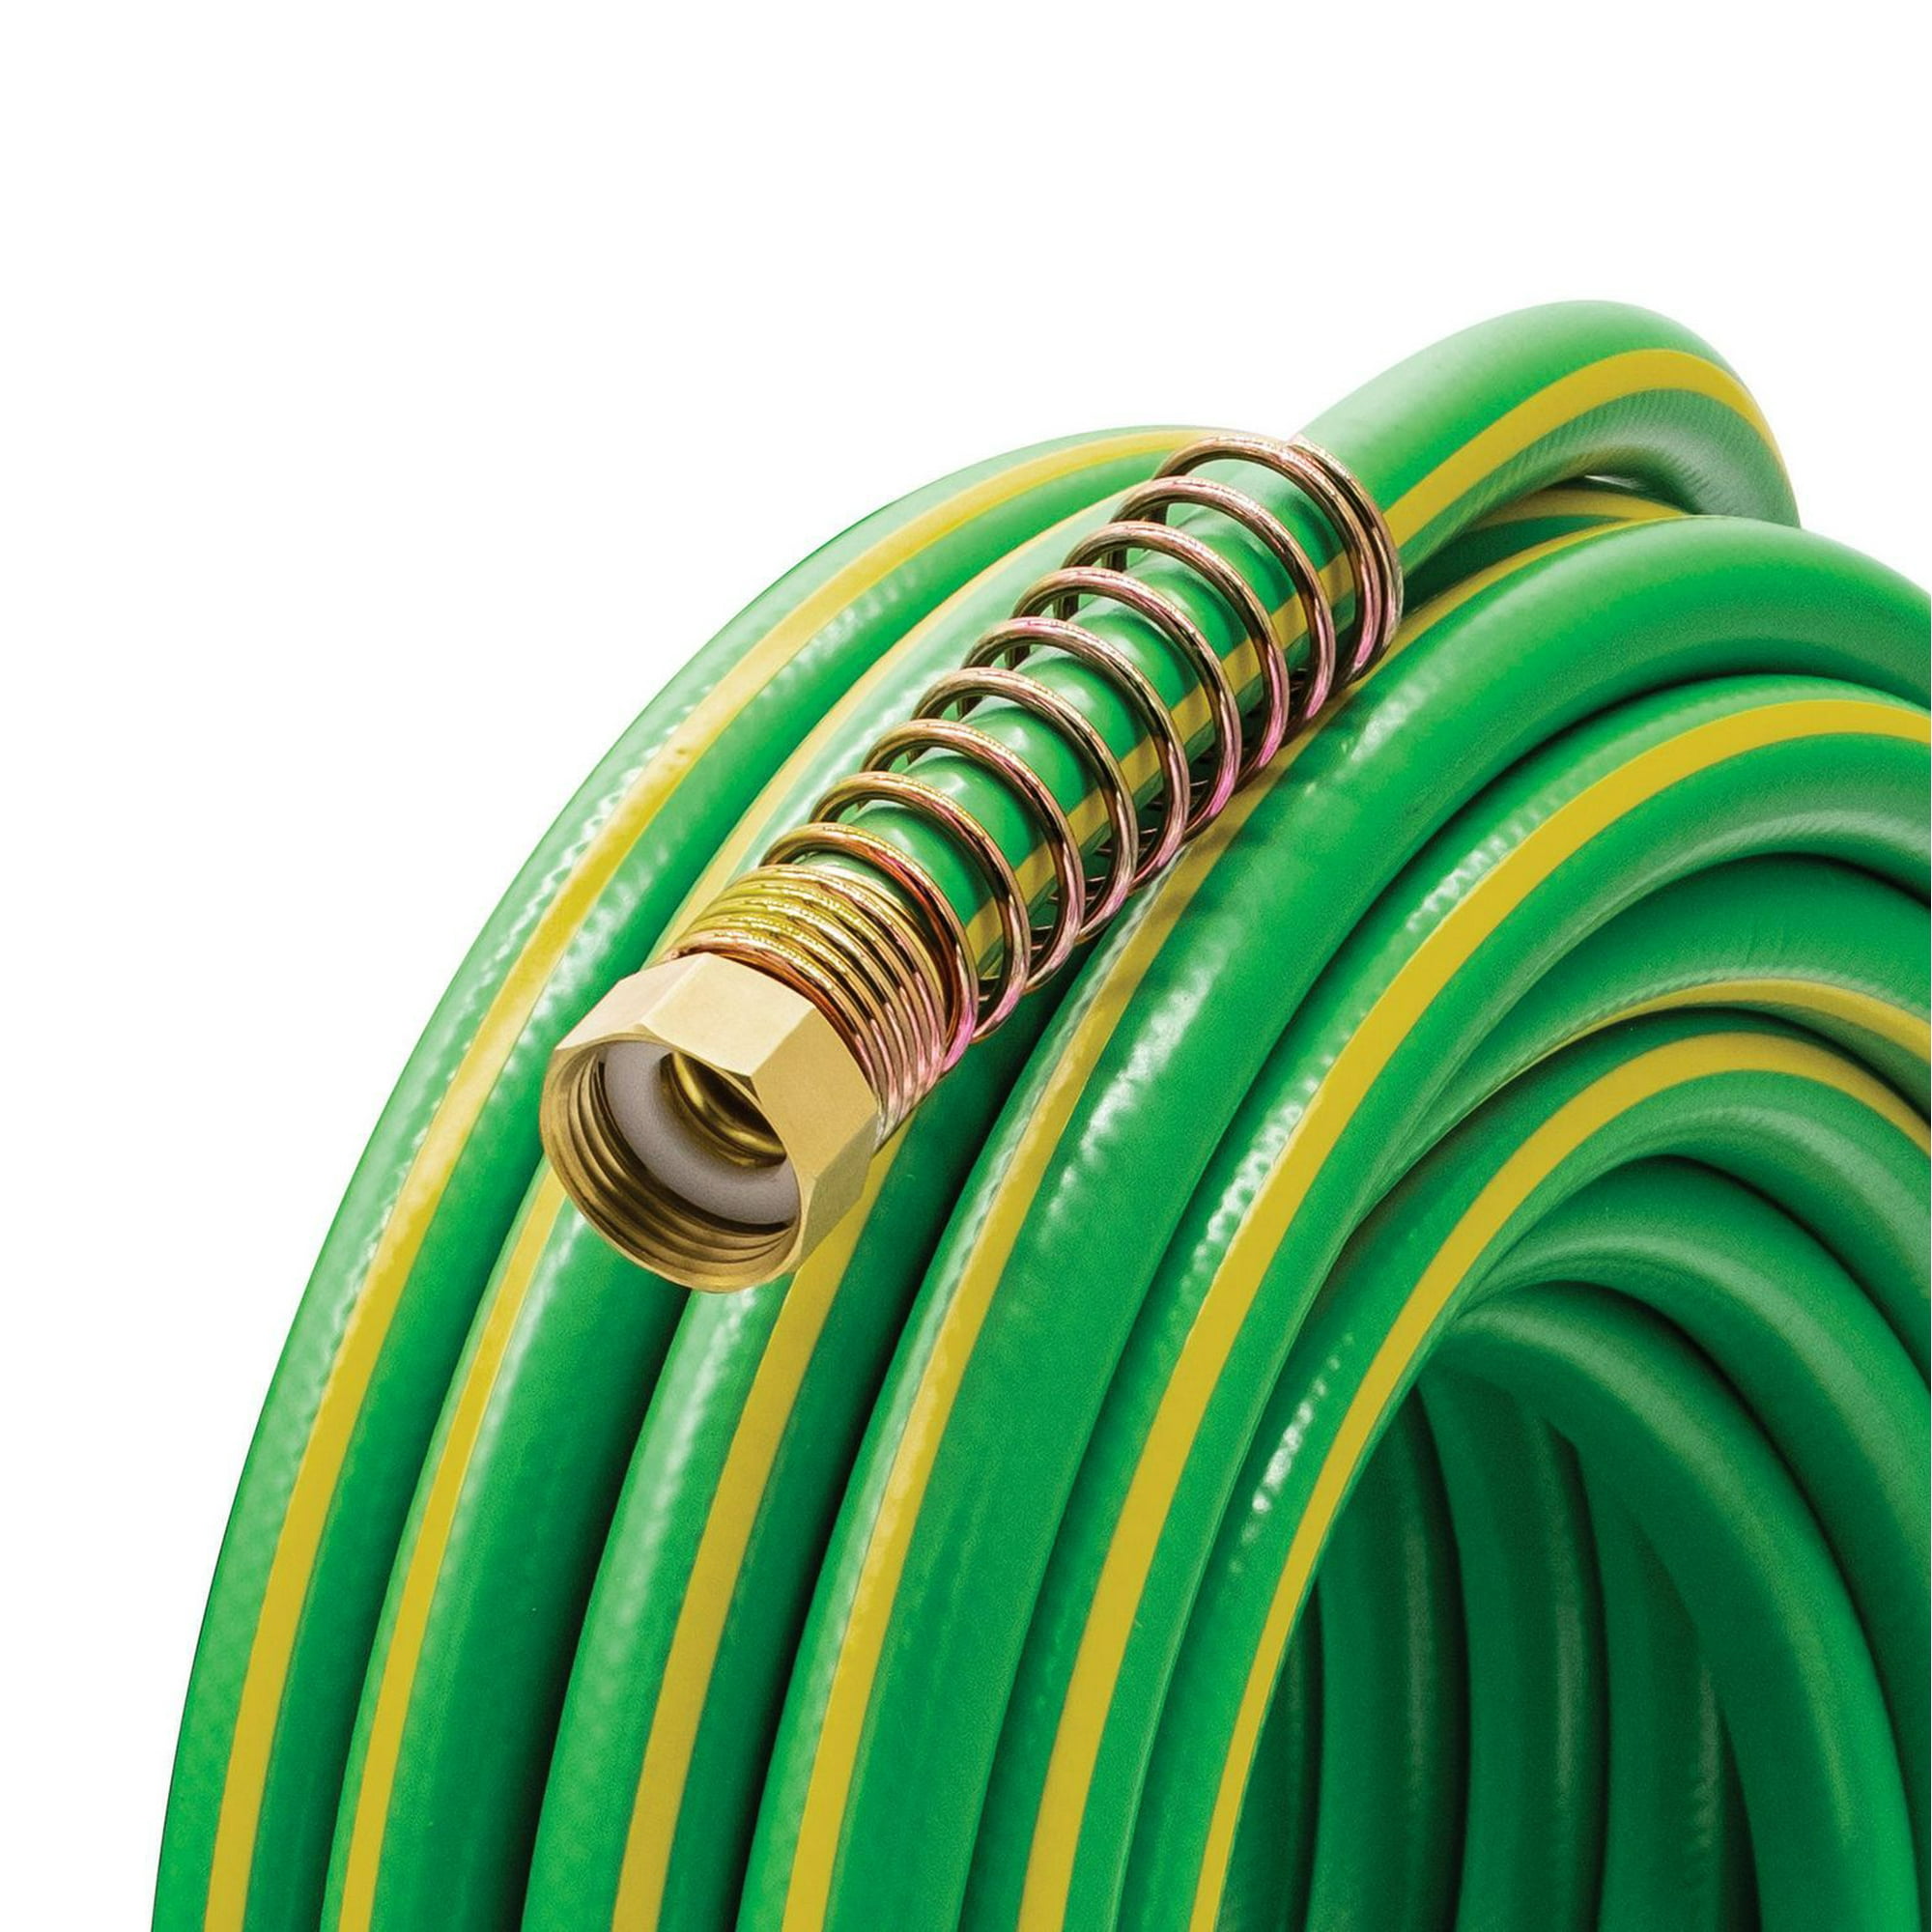 Fevone Garden Hose 100 ft x 5/8, Heavy Duty Water Hose, Flexible and Lightweight, Hybrid Hose Kink Free, Easy to Coil, Solid Aluminum Fittings - No